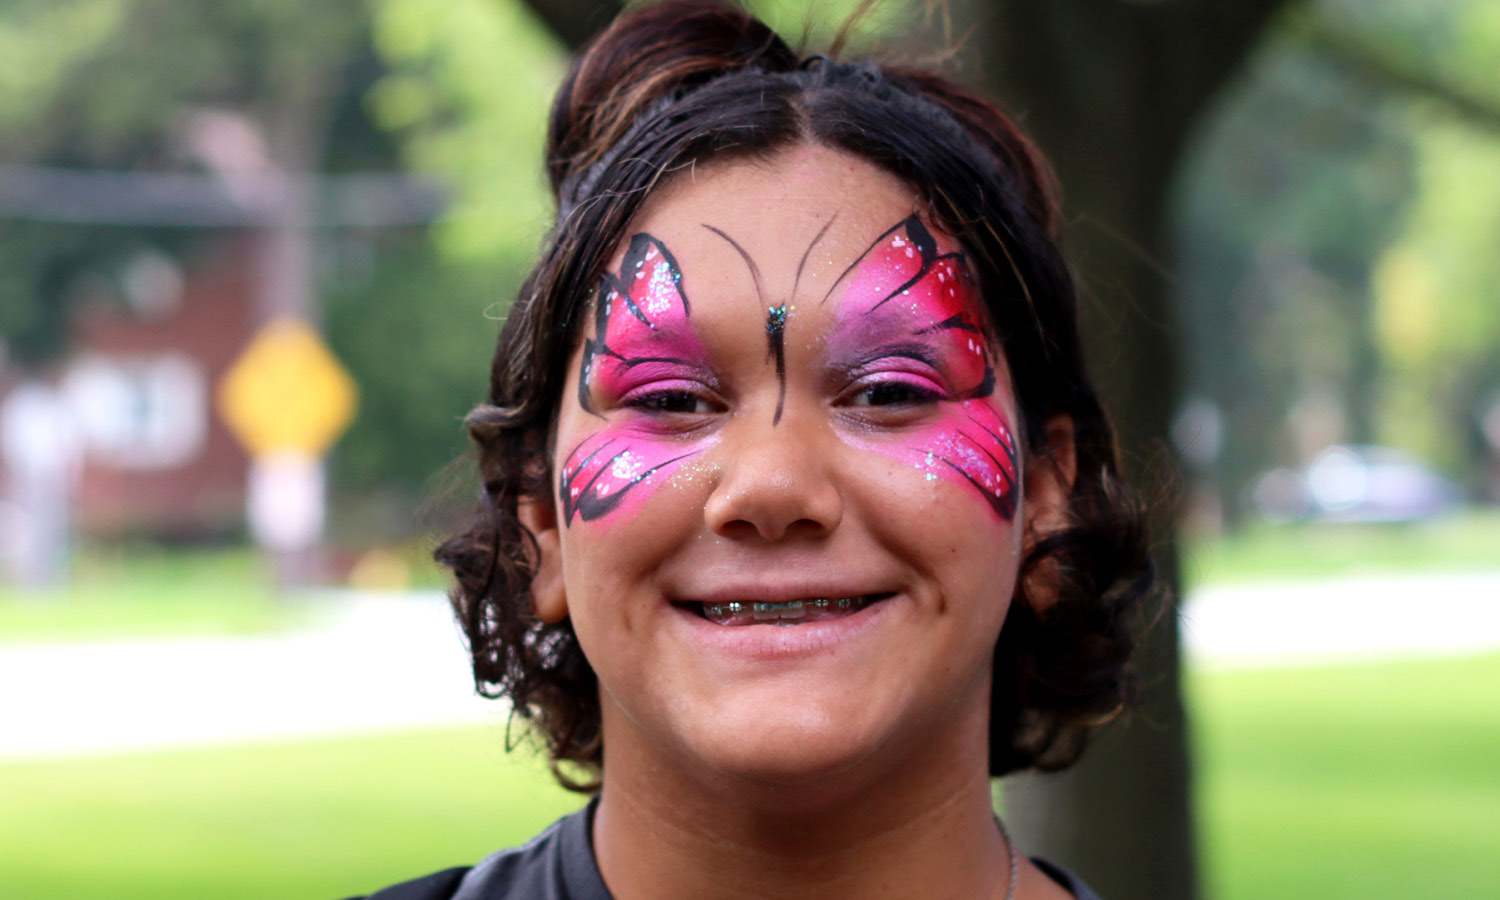 SSSRA participant smiling, wearing face paint of butterfly art